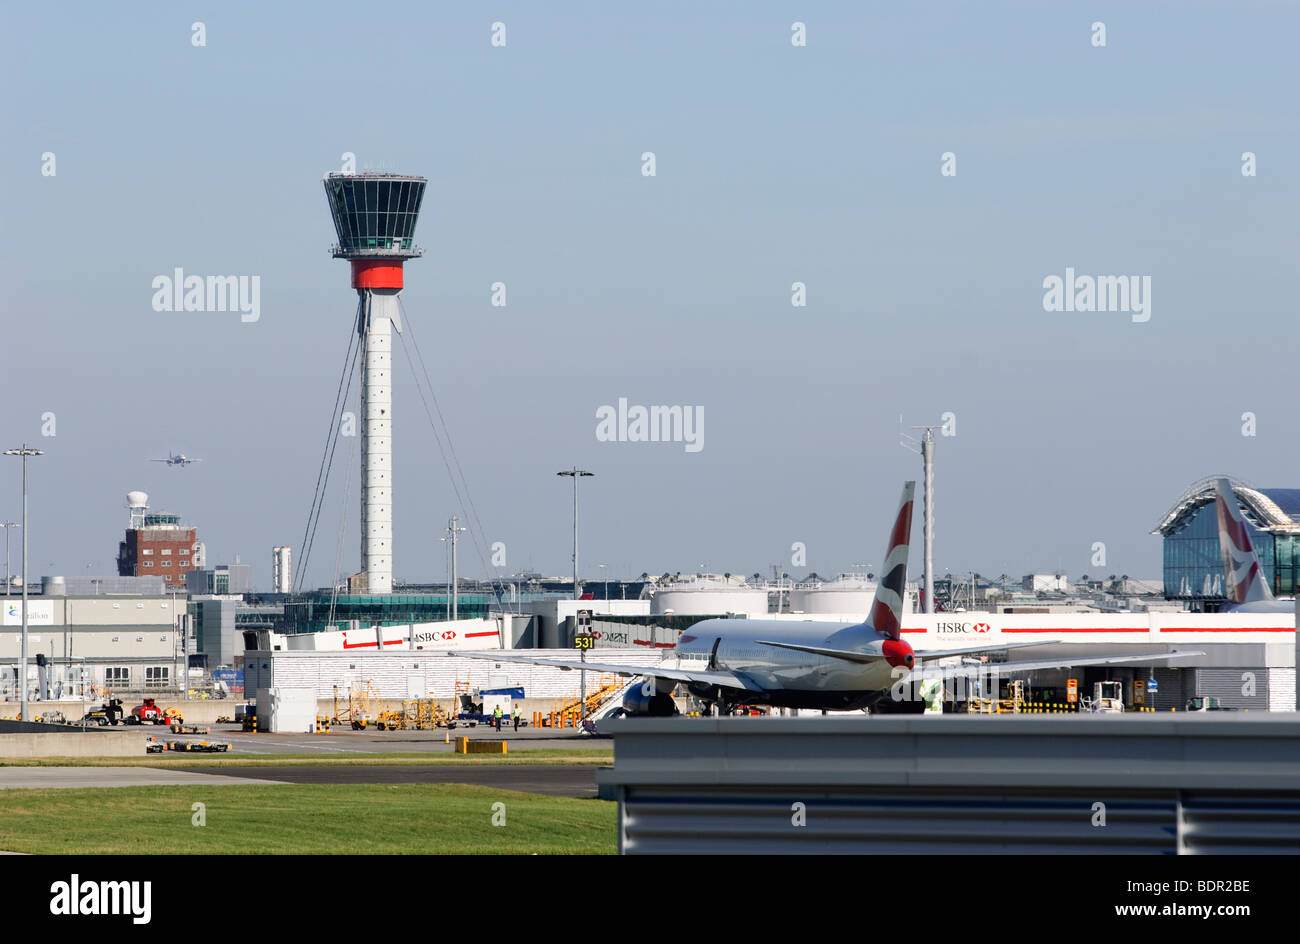 London Heathrow Airport, showing both old and new air traffic control towers, and a parked British Airways Boeing 777. Stock Photo